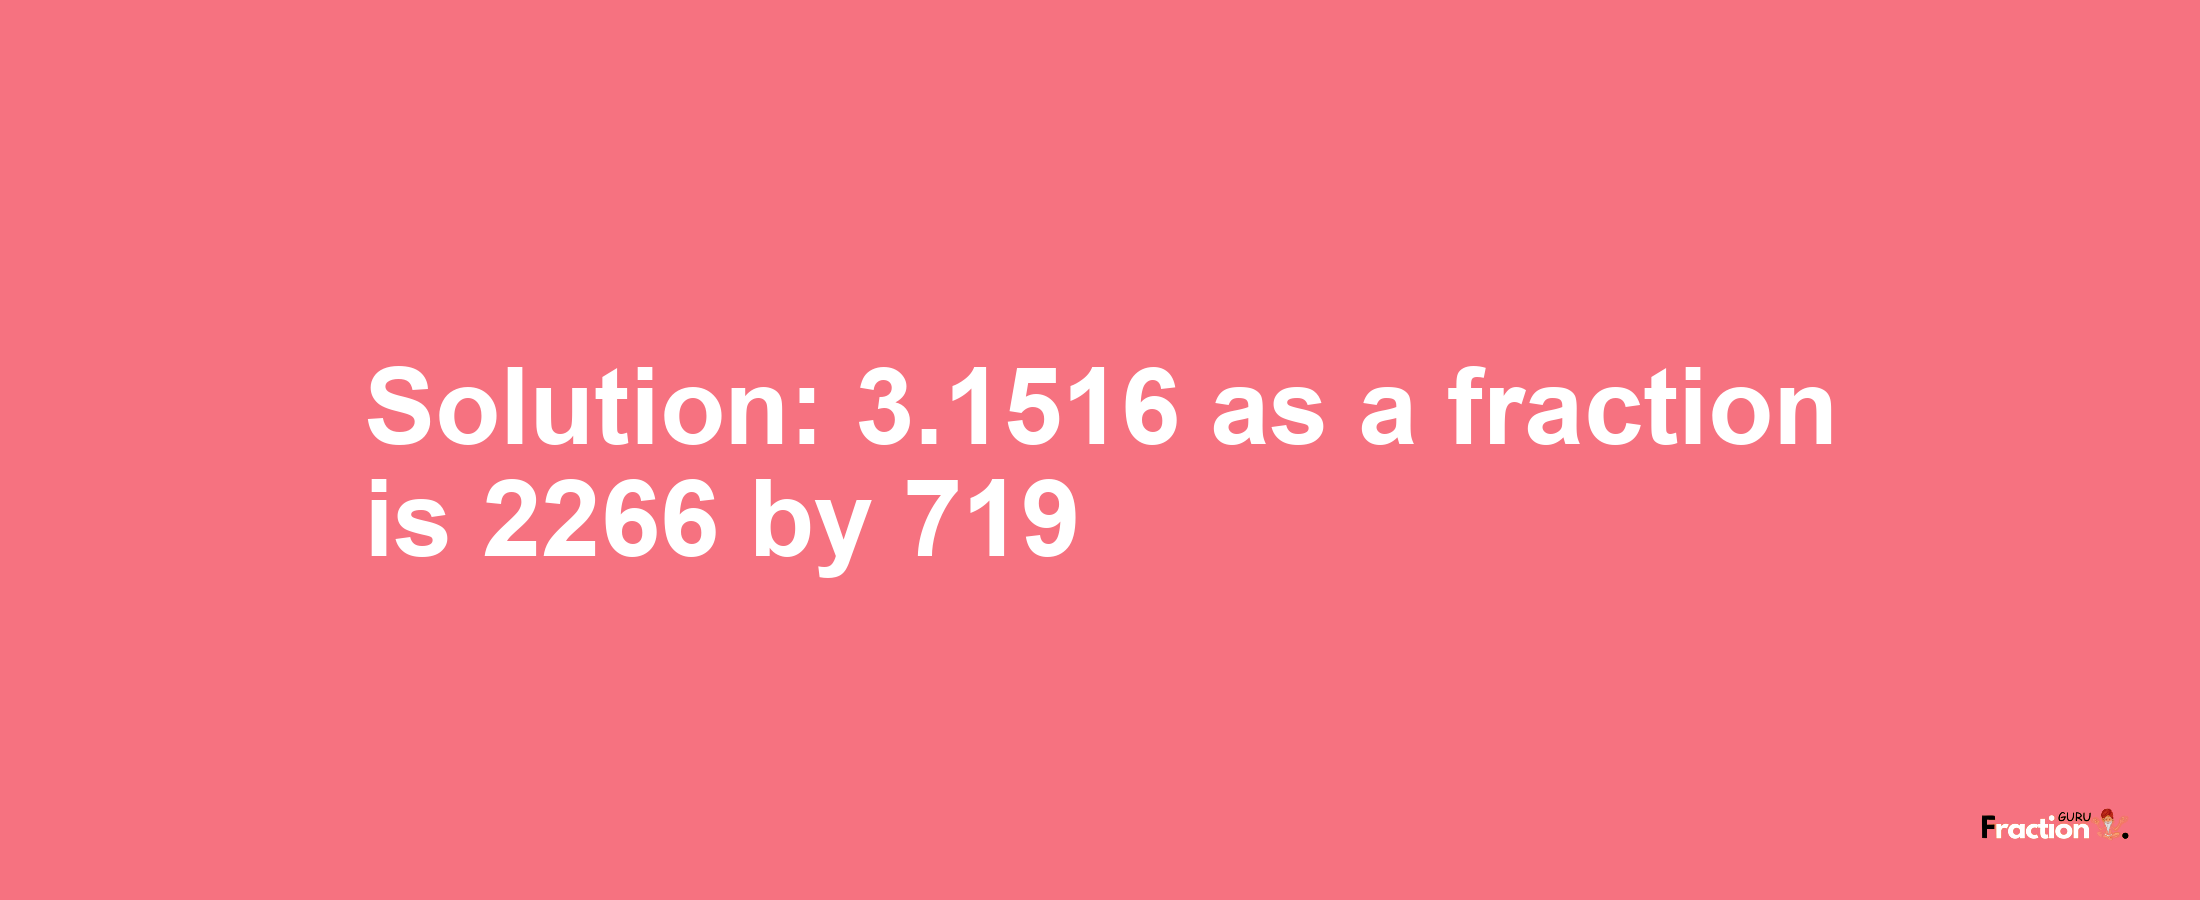 Solution:3.1516 as a fraction is 2266/719